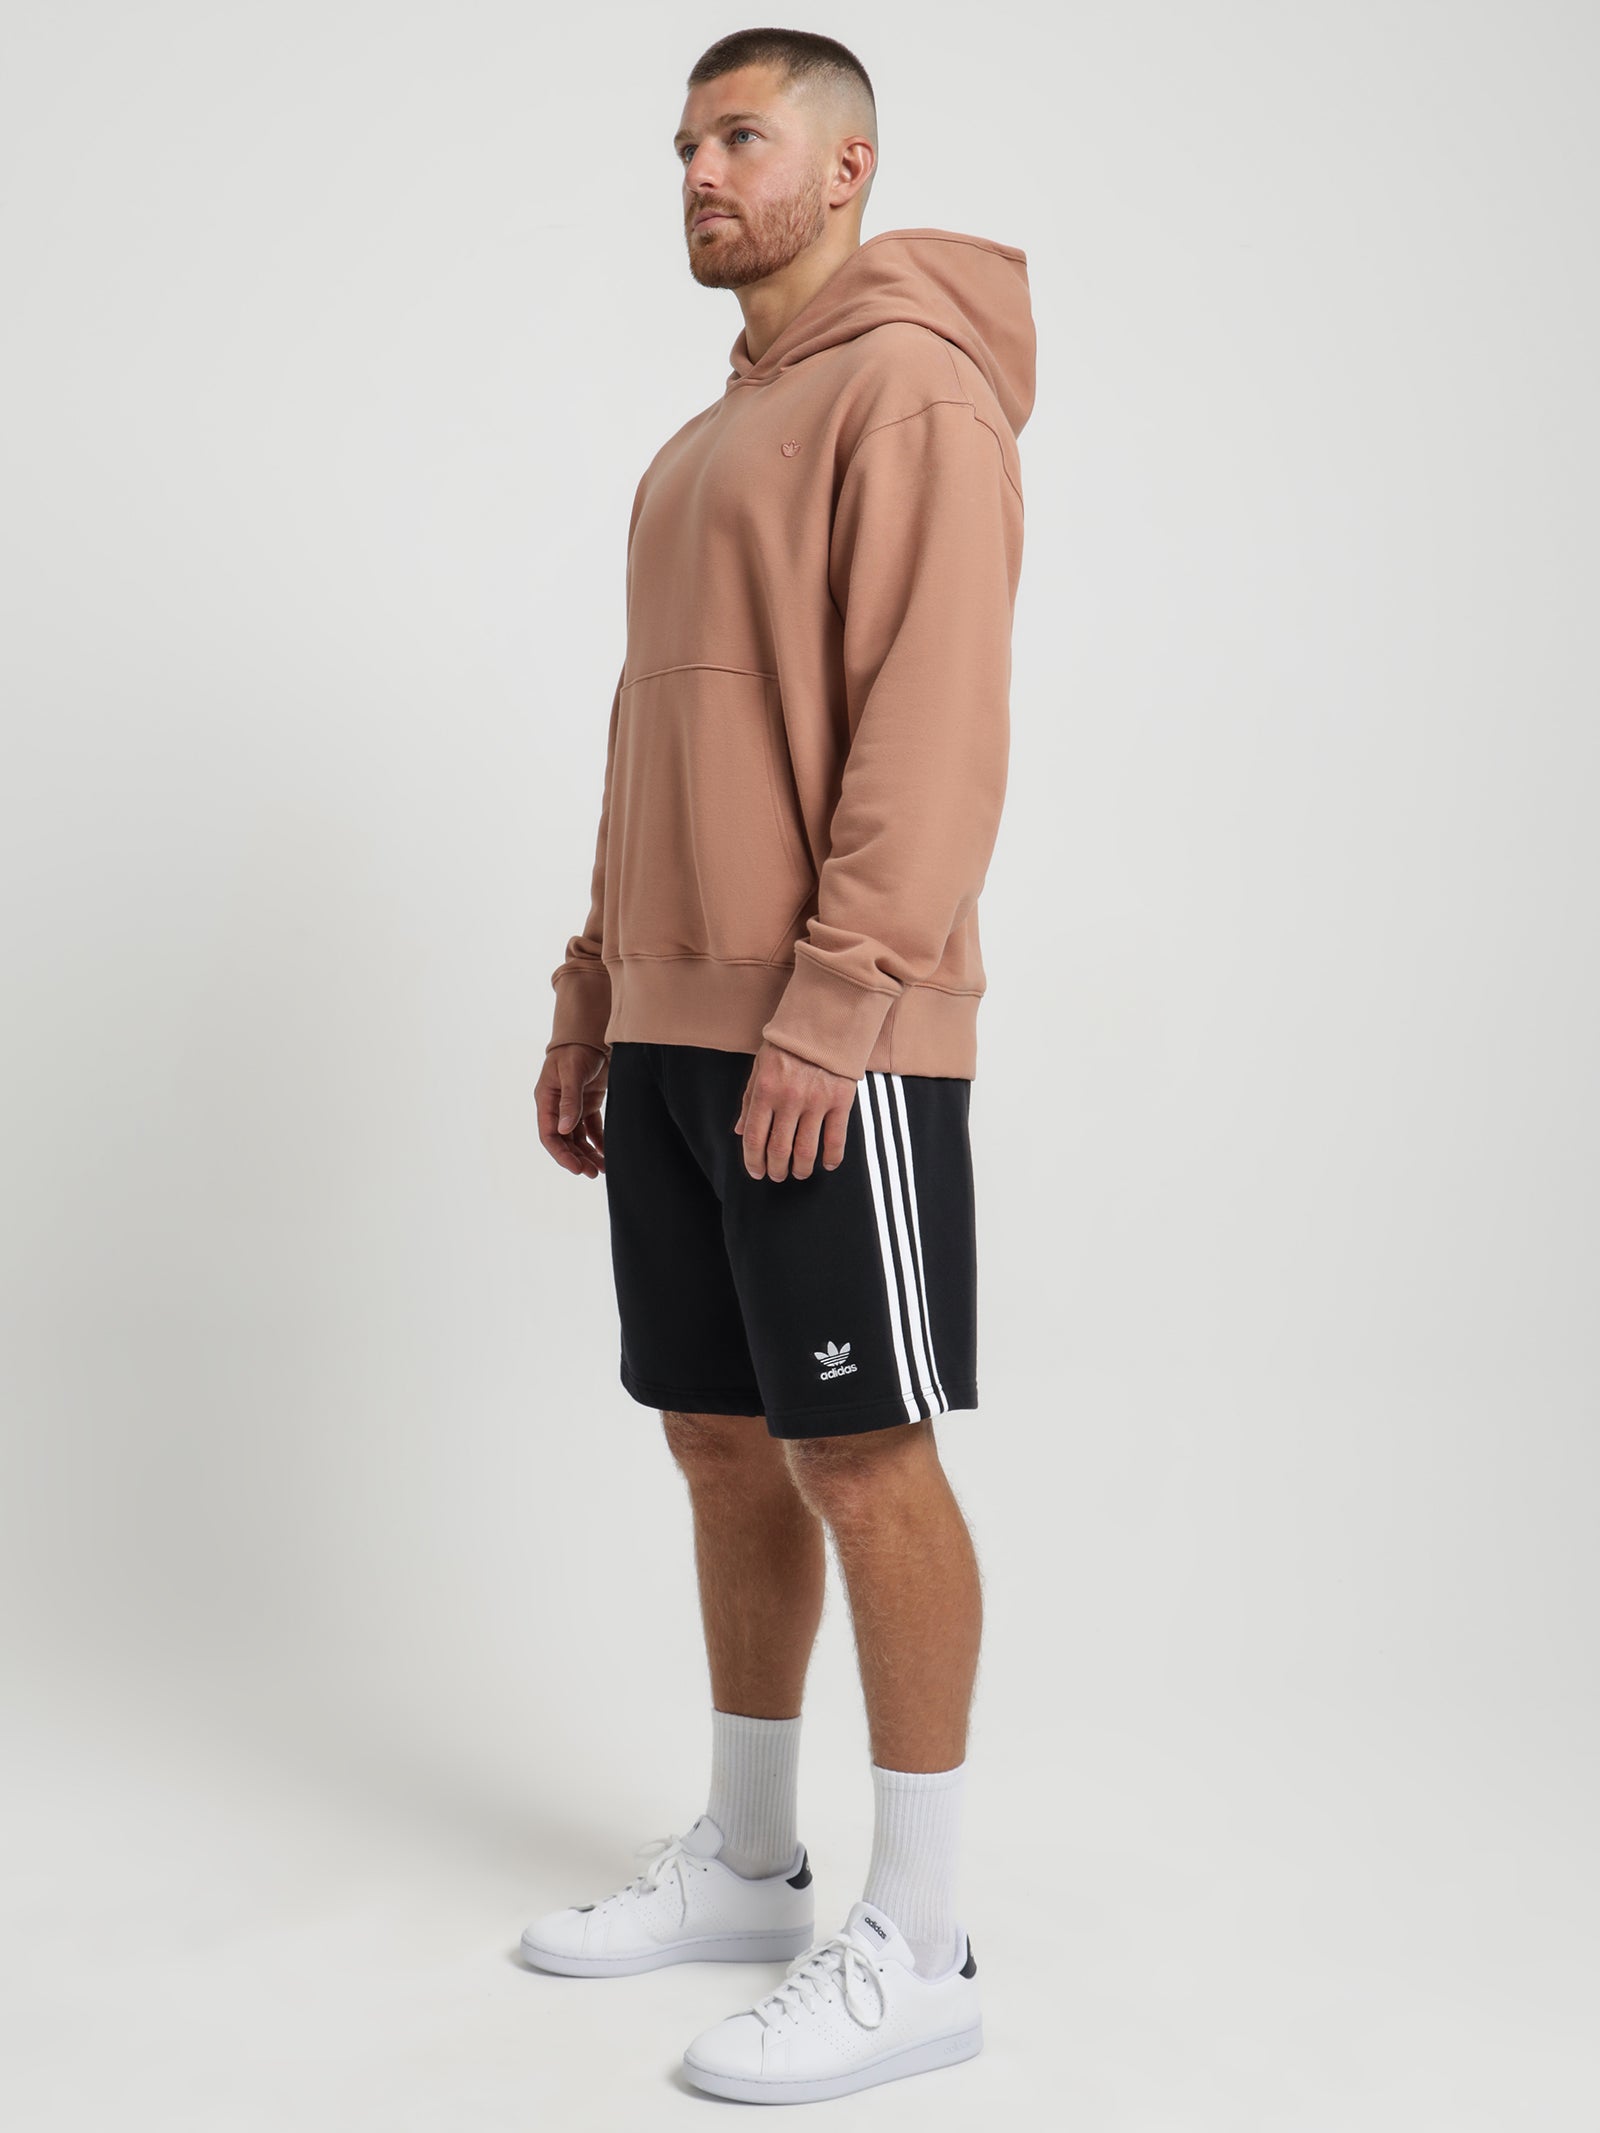 Adicolor Contempo French Terry Hoodie in Clay - Glue Store